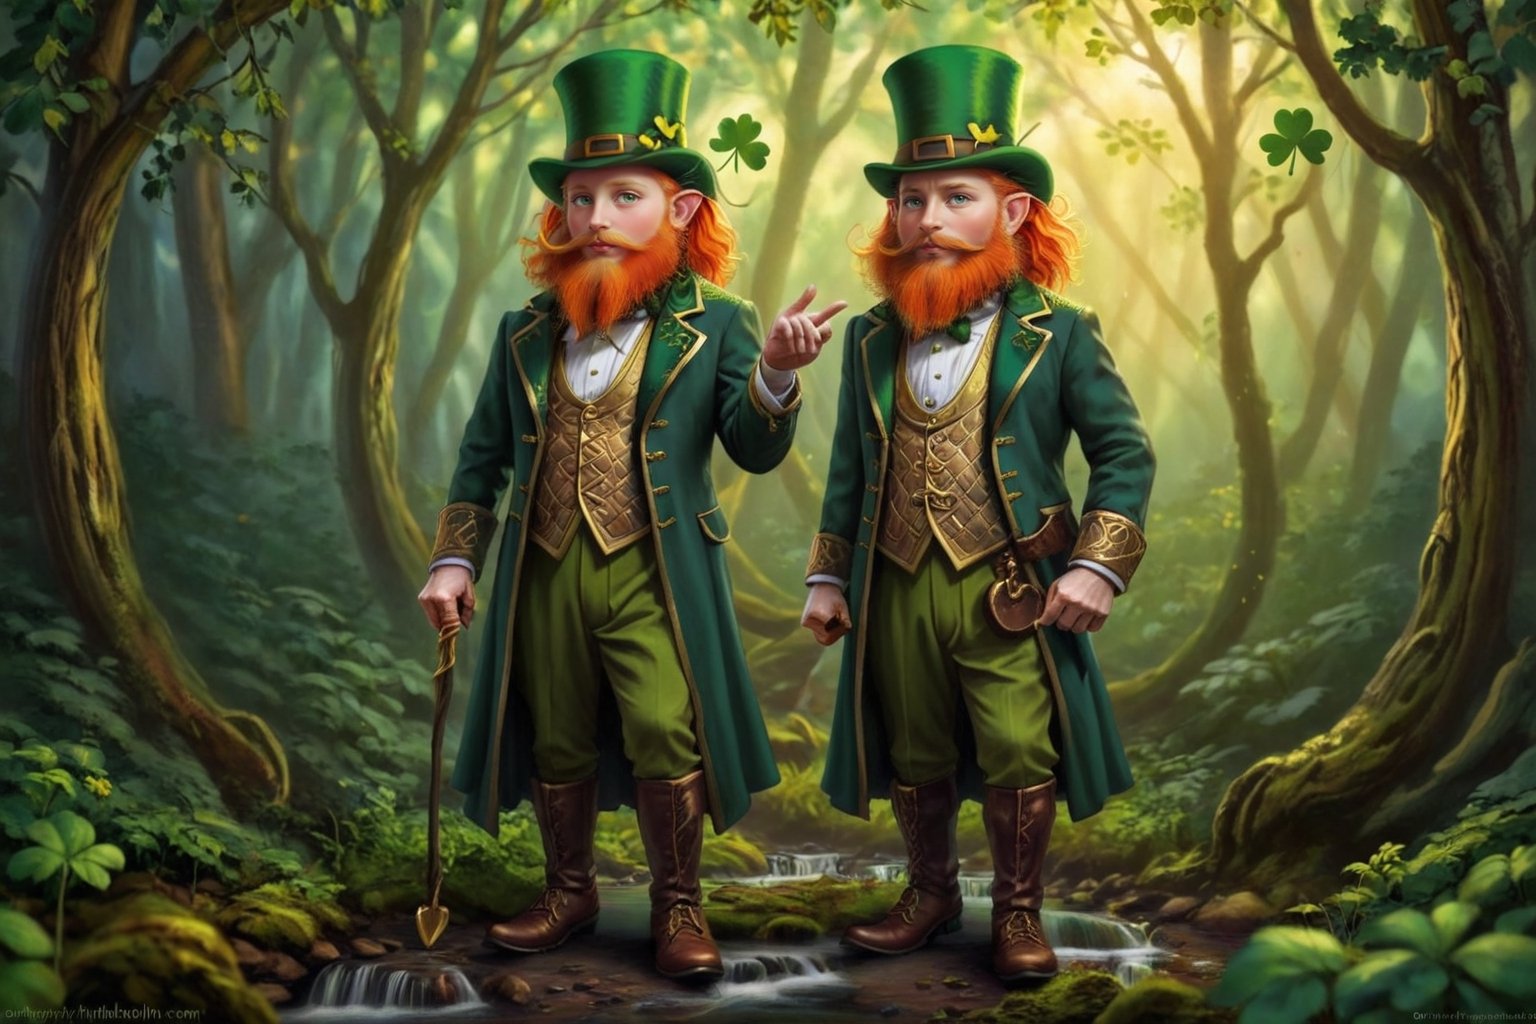 orange hair and beard
1 person only
facial features of an old man, elderly person, grandfather's face
detailed facial features, great detail on the face
dwarf, pixie, very short man
(((standing, full body, Leprechaun, Irish leprechaun, forest spirit, humanoid, small man, green suit, green top hat)))
Imagine a mystical and enchanted landscape where emerald green and gold colors intertwine in a dance of light and shadow. In the center of the scene, an ancient forest emerges, its trees seem to whisper ancient secrets while the leaves dance to the rhythm of the wind. High in the sky, a resplendent rainbow curves majestically, revealing a legendary treasure that awaits those with brave hearts. In the clearing of this magical forest, an enigmatic figure appears: a leprechaun, guardian of fortune and bearer of the Celtic essence. The fae's gaze shines with ancient wisdom, inviting viewers to enter a realm of wonder and adventure. What hidden secrets and lost treasures await in this dream world inspired by the magic of St. Patrick and rich Celtic tradition?,SaintP,,asmongold,gothic art, oil painting,shards,druidic,Movie Still